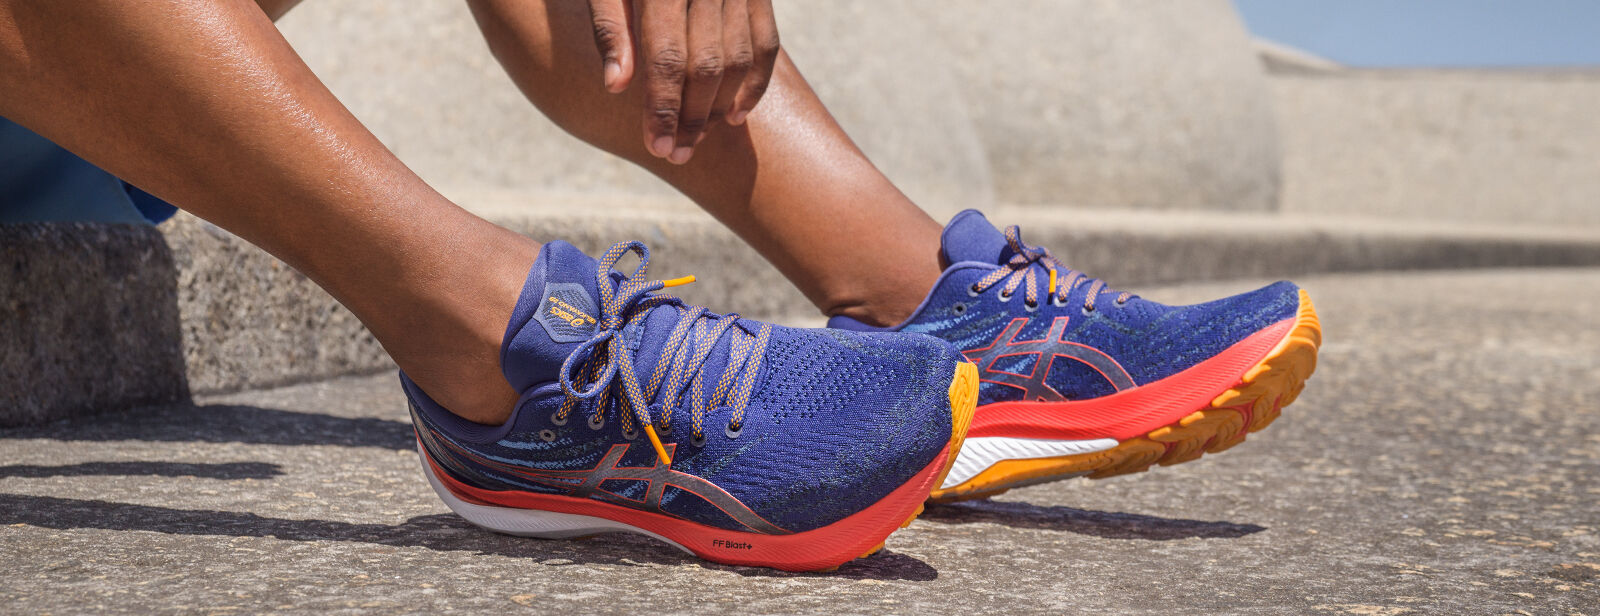 What Is The Widest Asics Shoes? - Shoe Effect